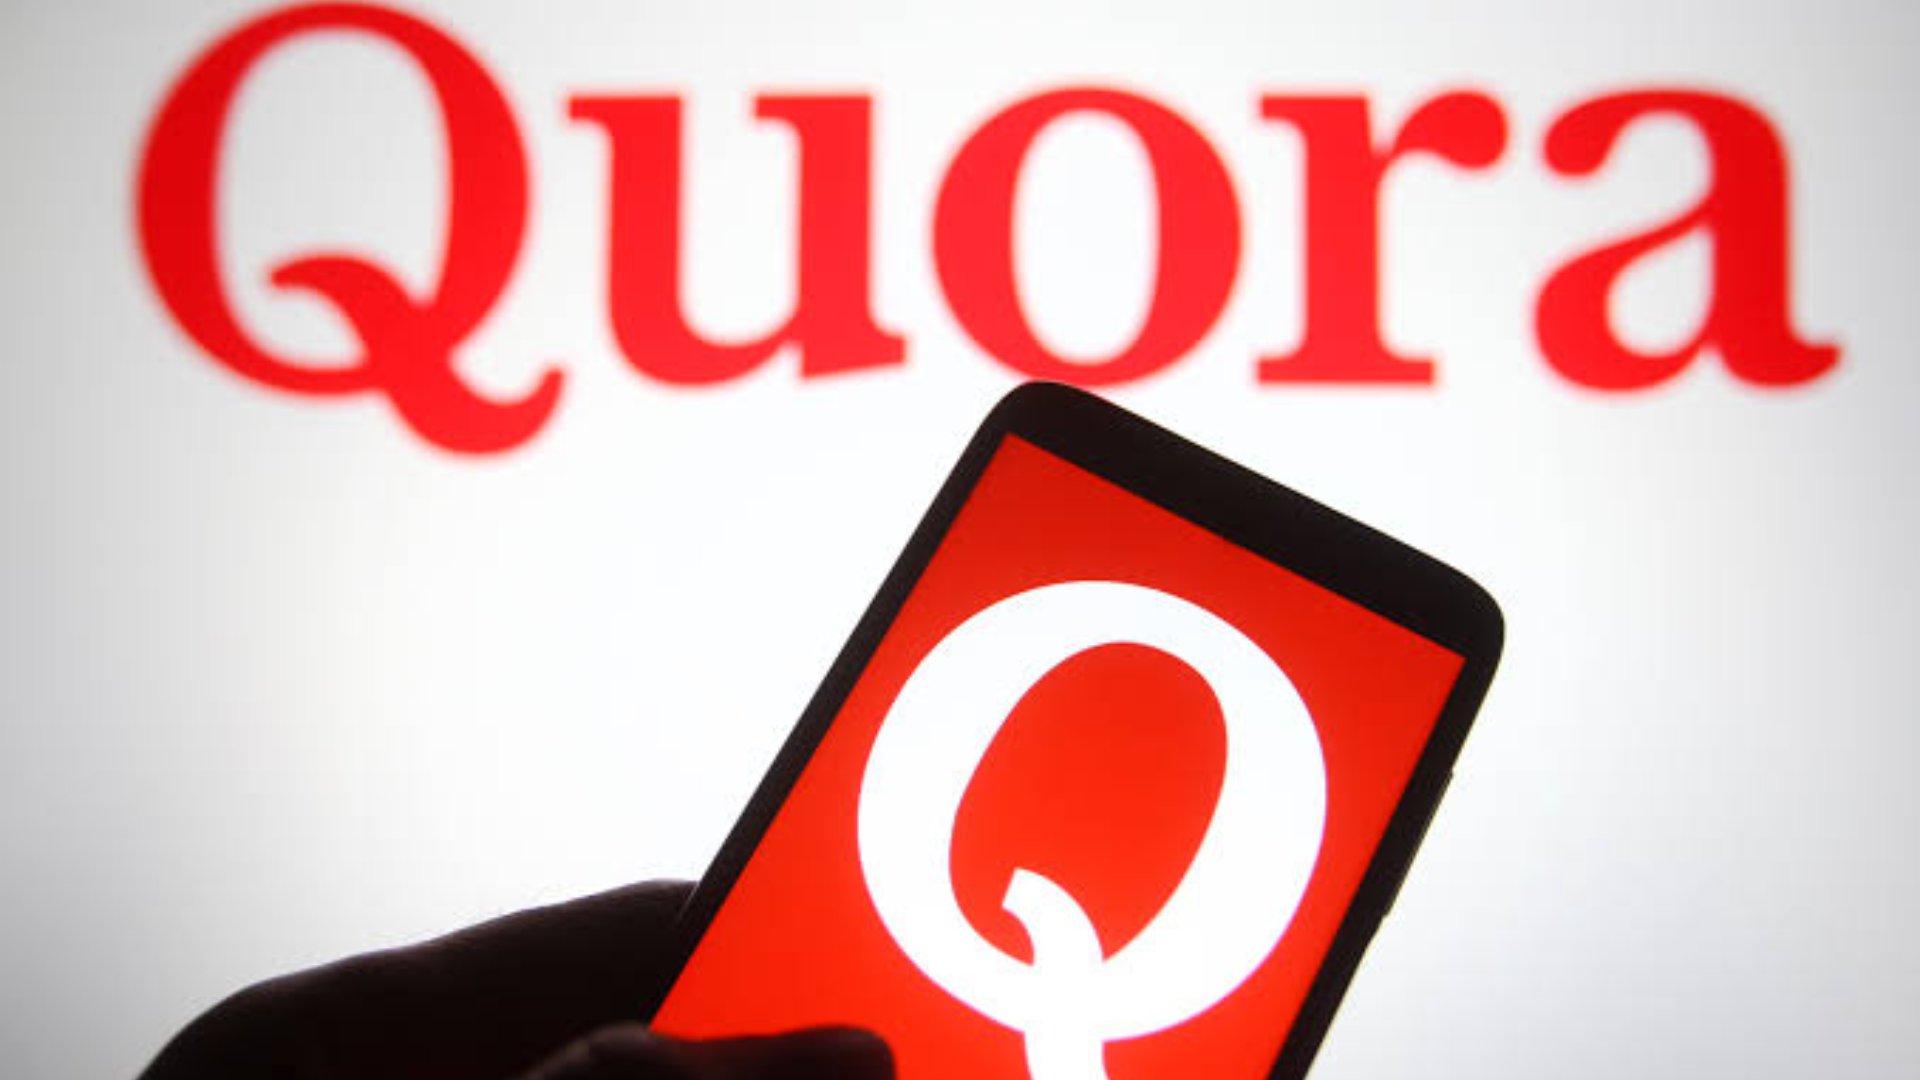 Quora Latest Update Will Take Effect On 25 August 2023: Quora is updating their Terms of Service and Privacy Policy